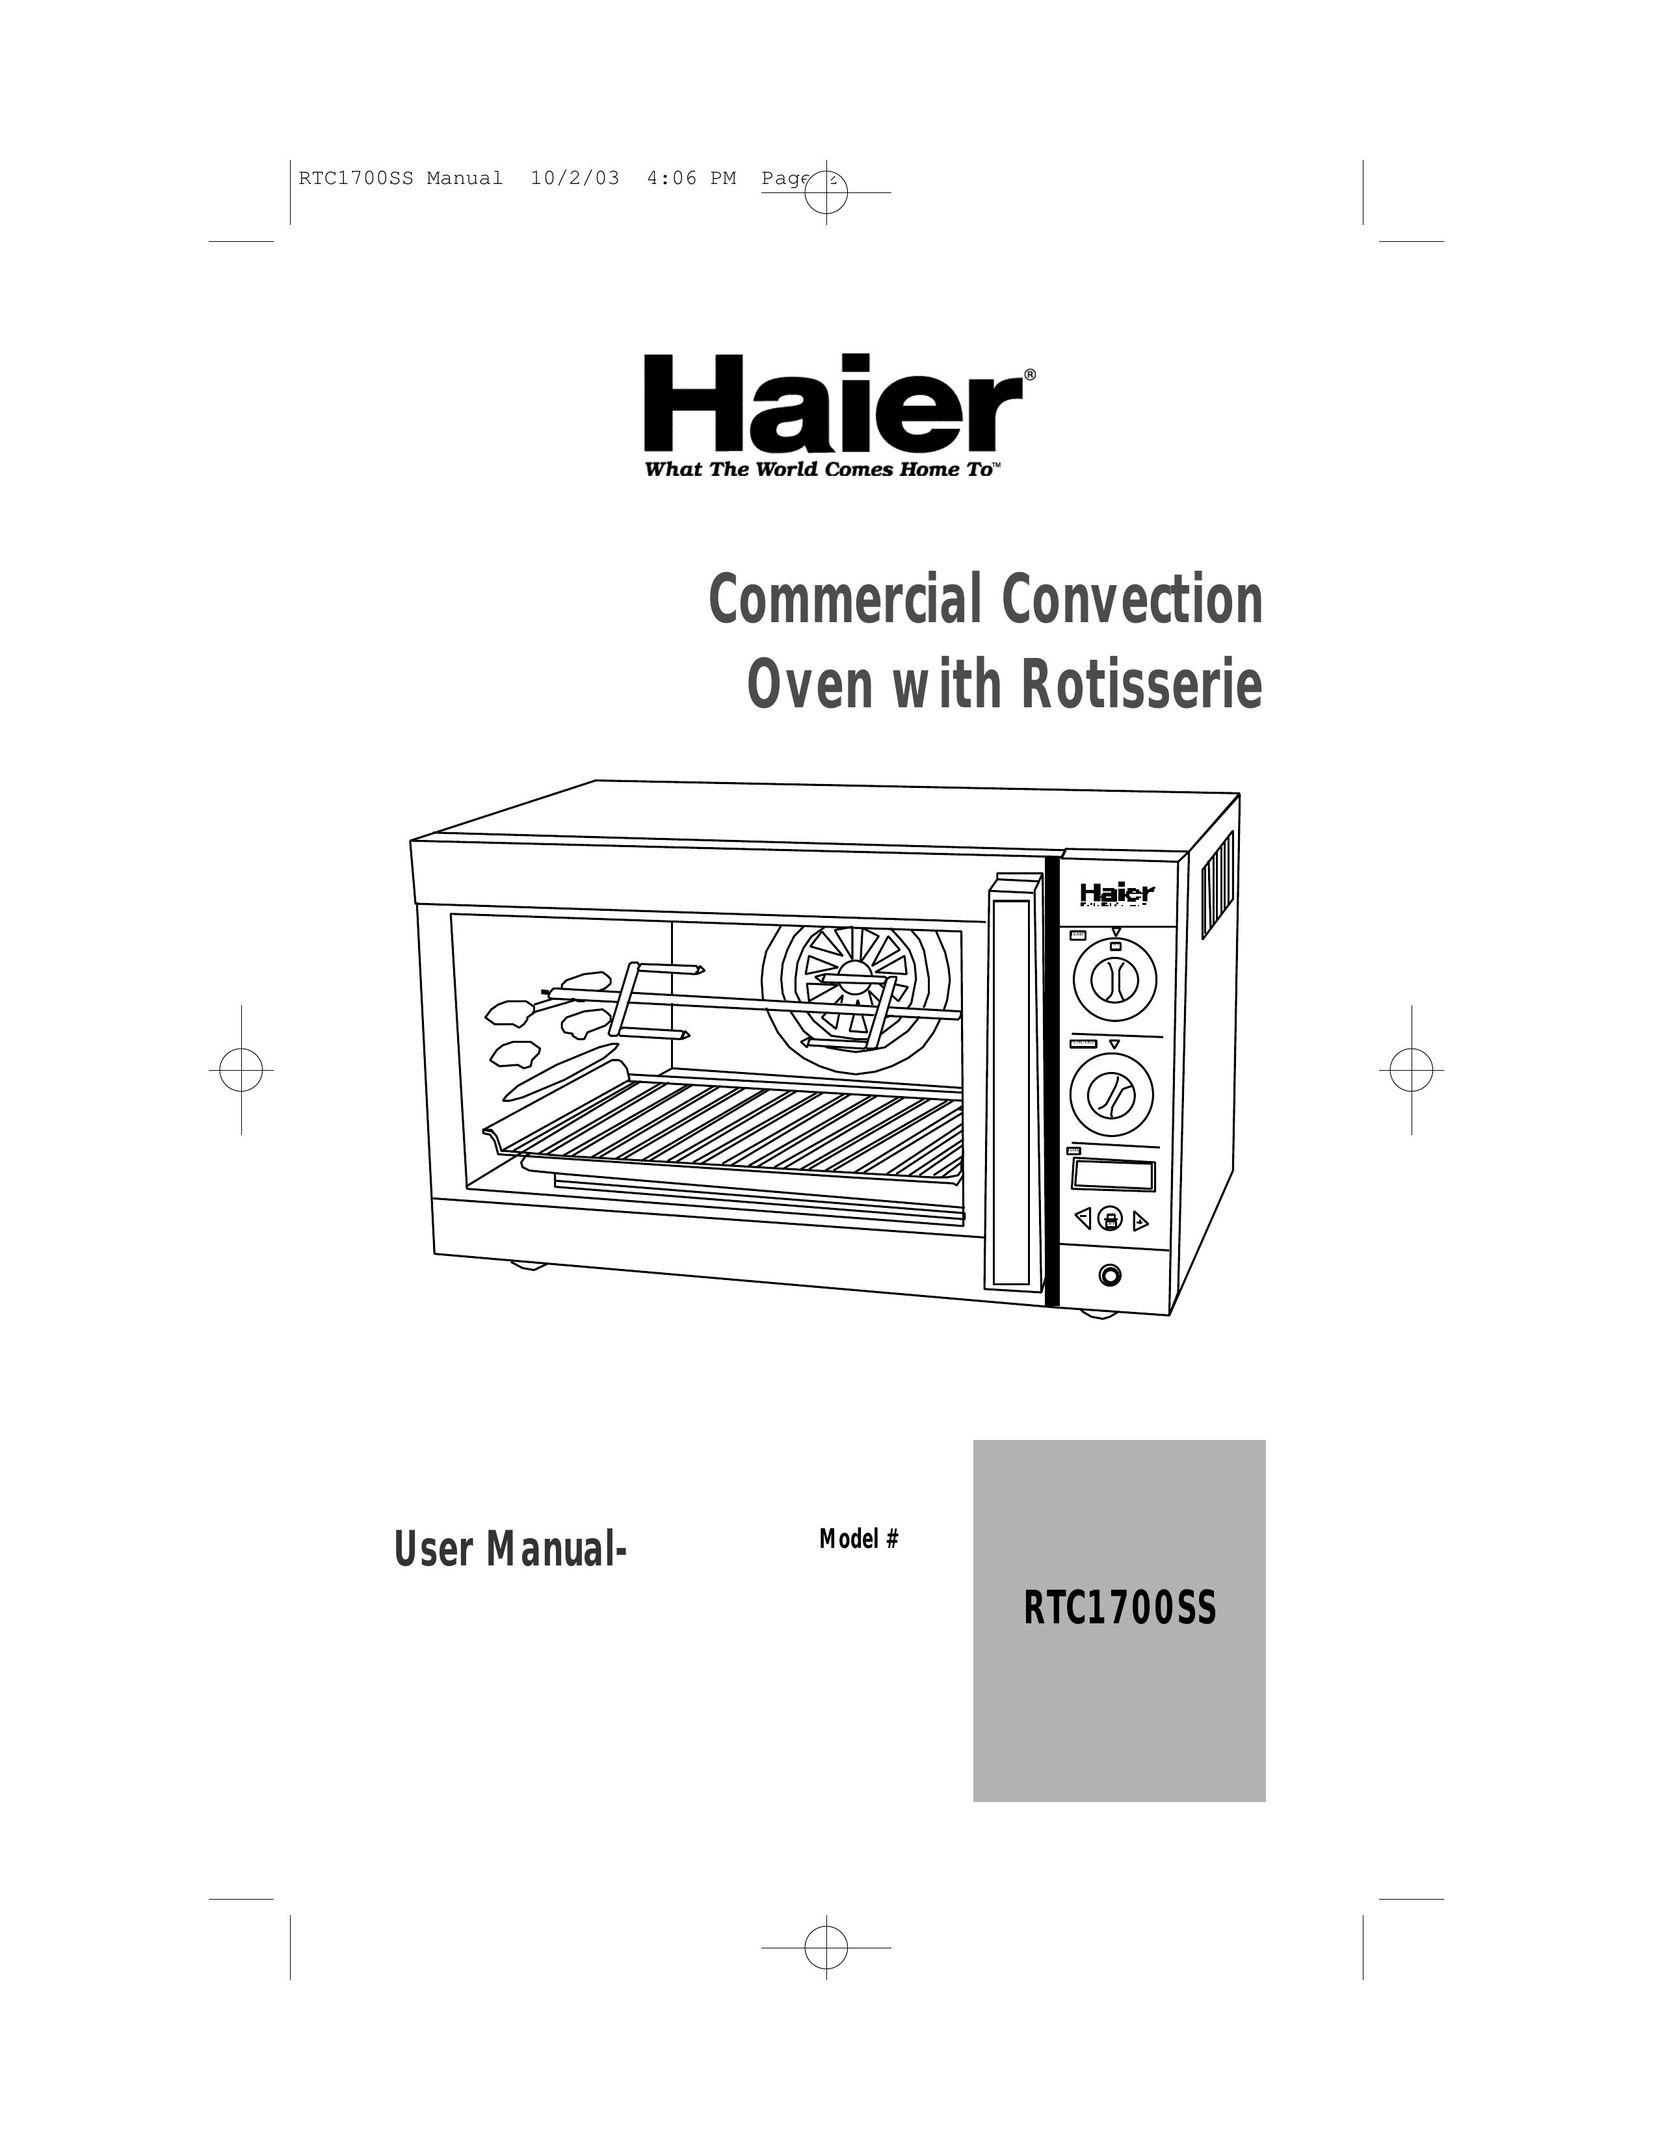 Haier RTC1700SS Oven User Manual